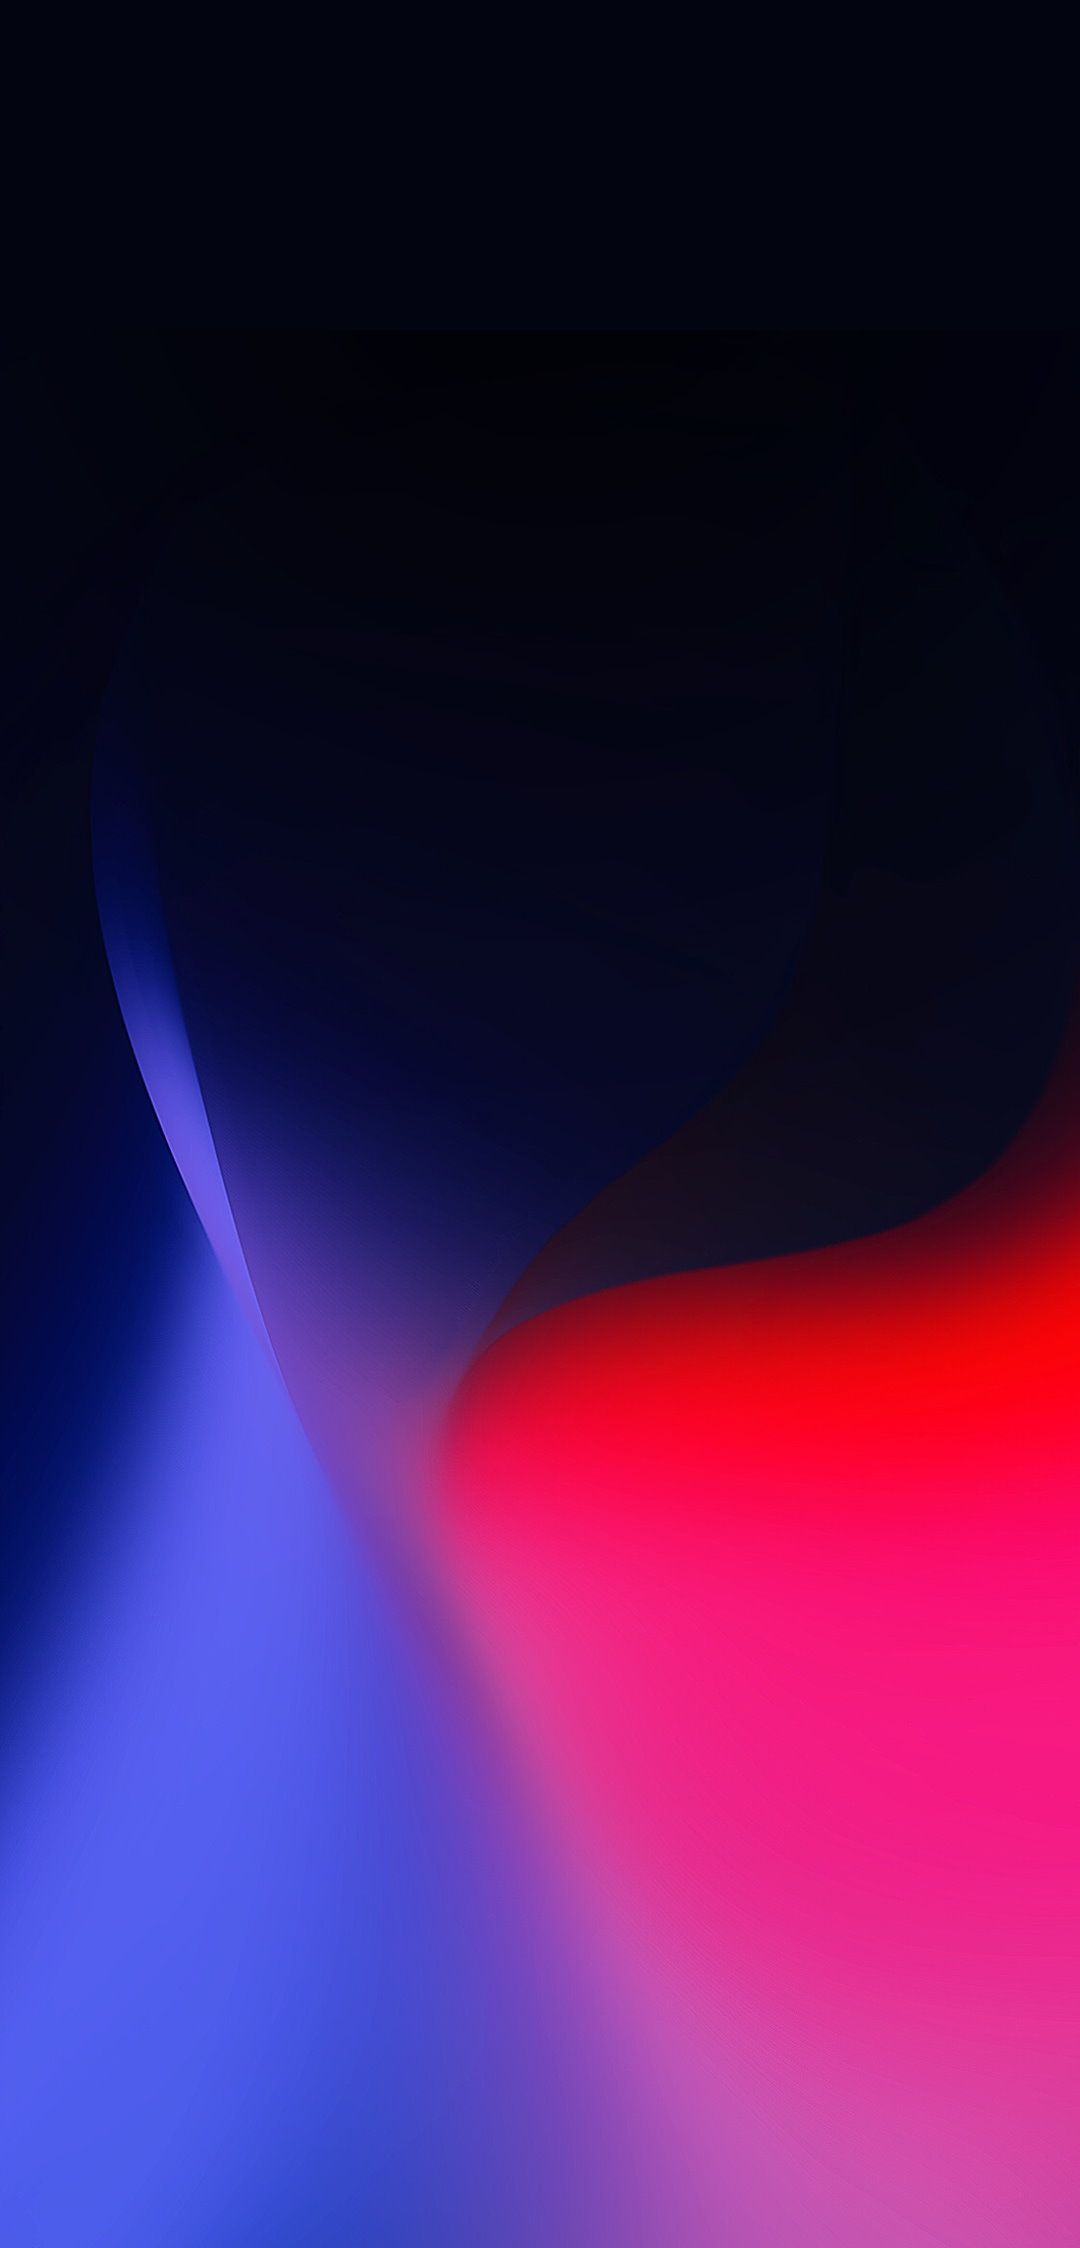 Download 34 of the MIUI 13 wallpapers here - Android Authority